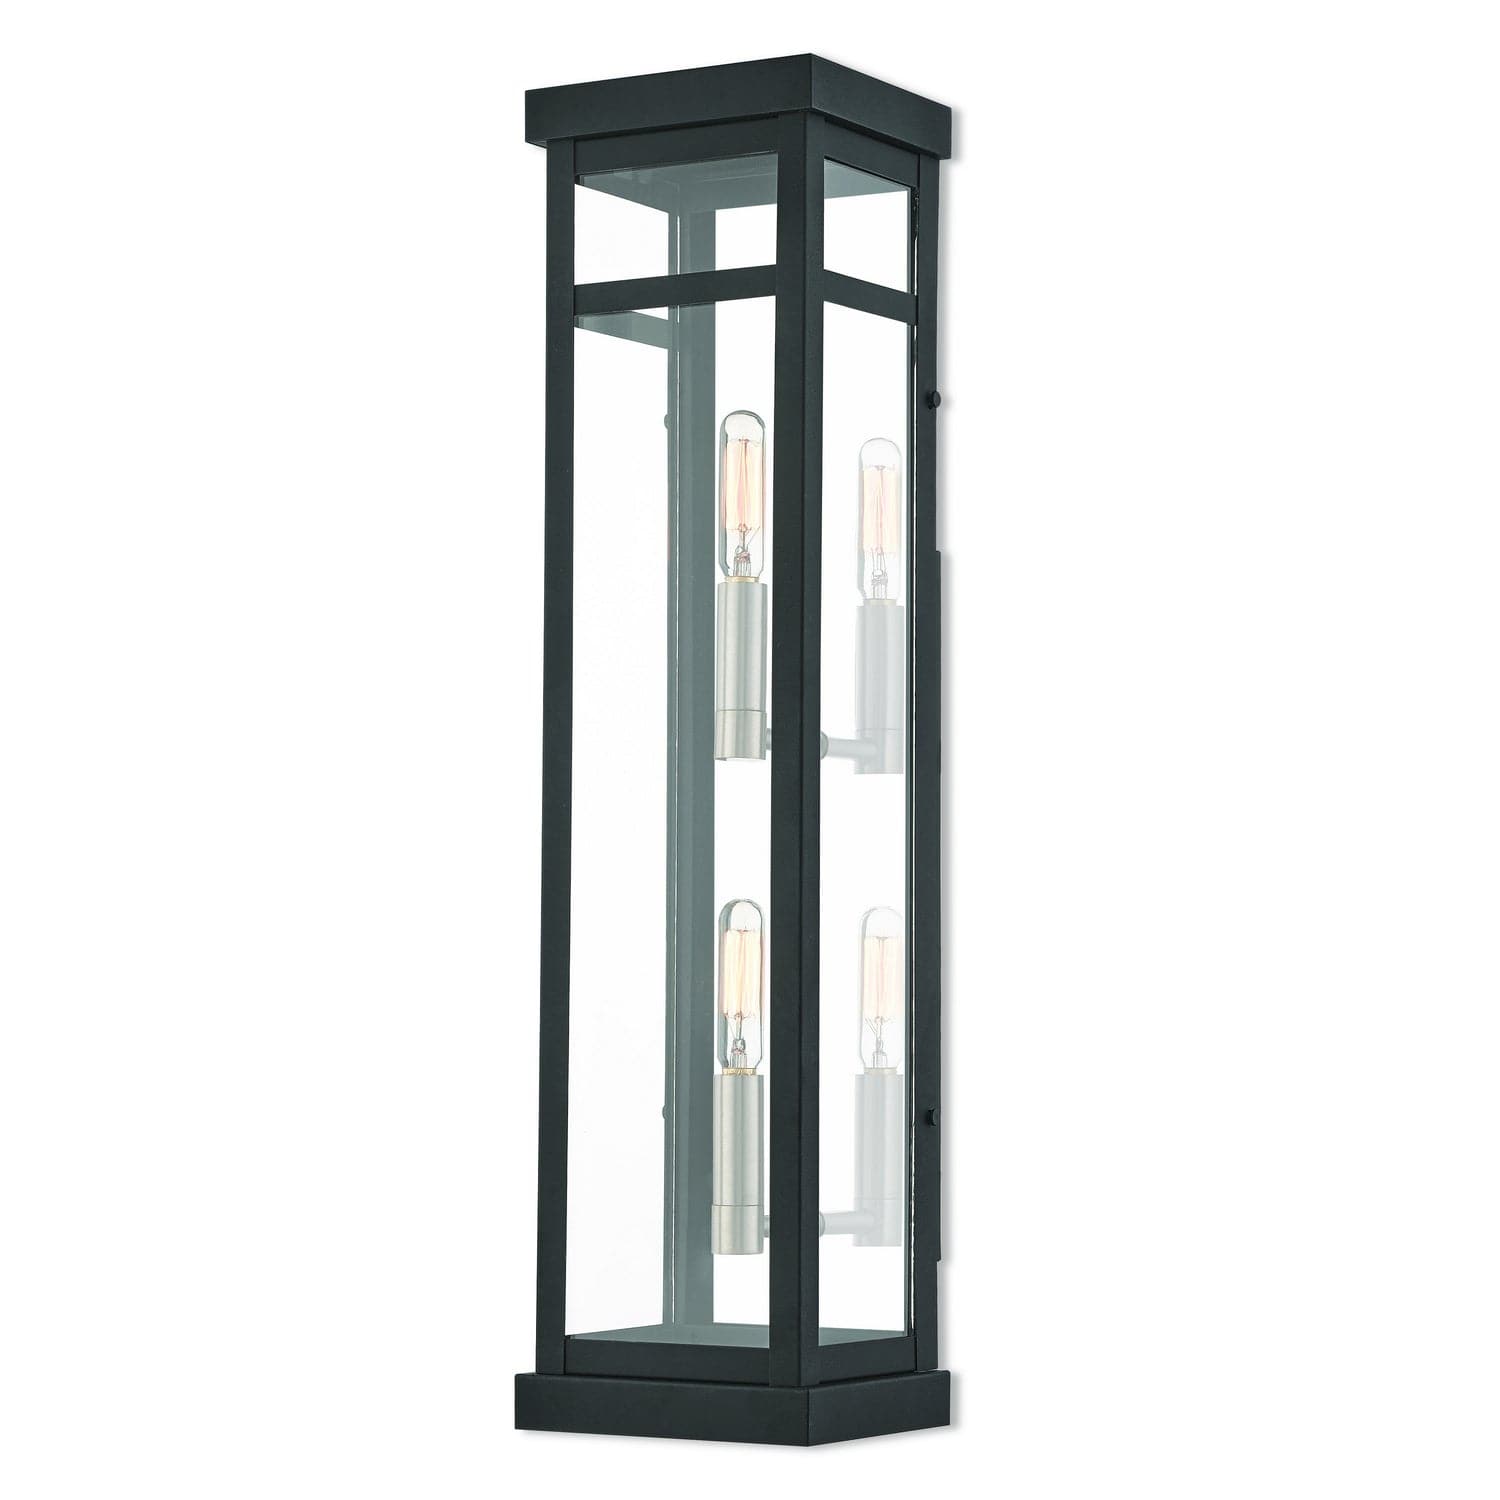 Livex Lighting - 20706-04 - Two Light Outdoor Wall Lantern - Hopewell - Black w/ Brushed Nickel Cluster and Polished Chrome Stainless Steel